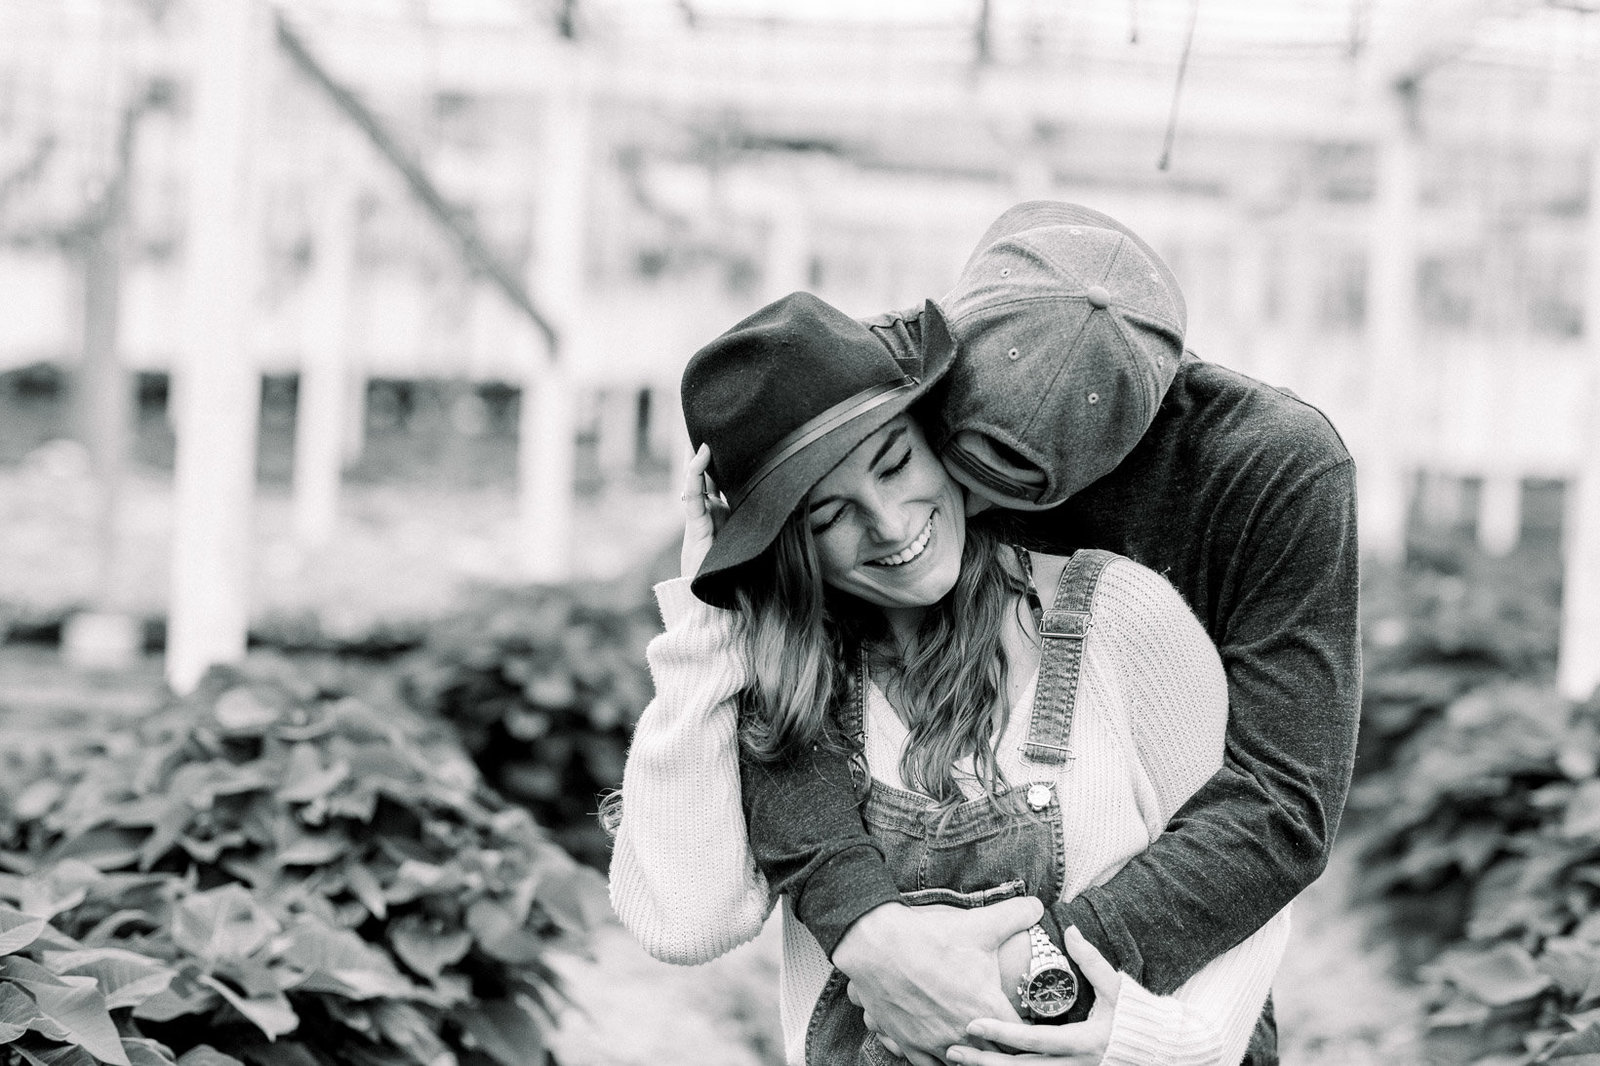 Couples portraits captured by Staci Addison Photography